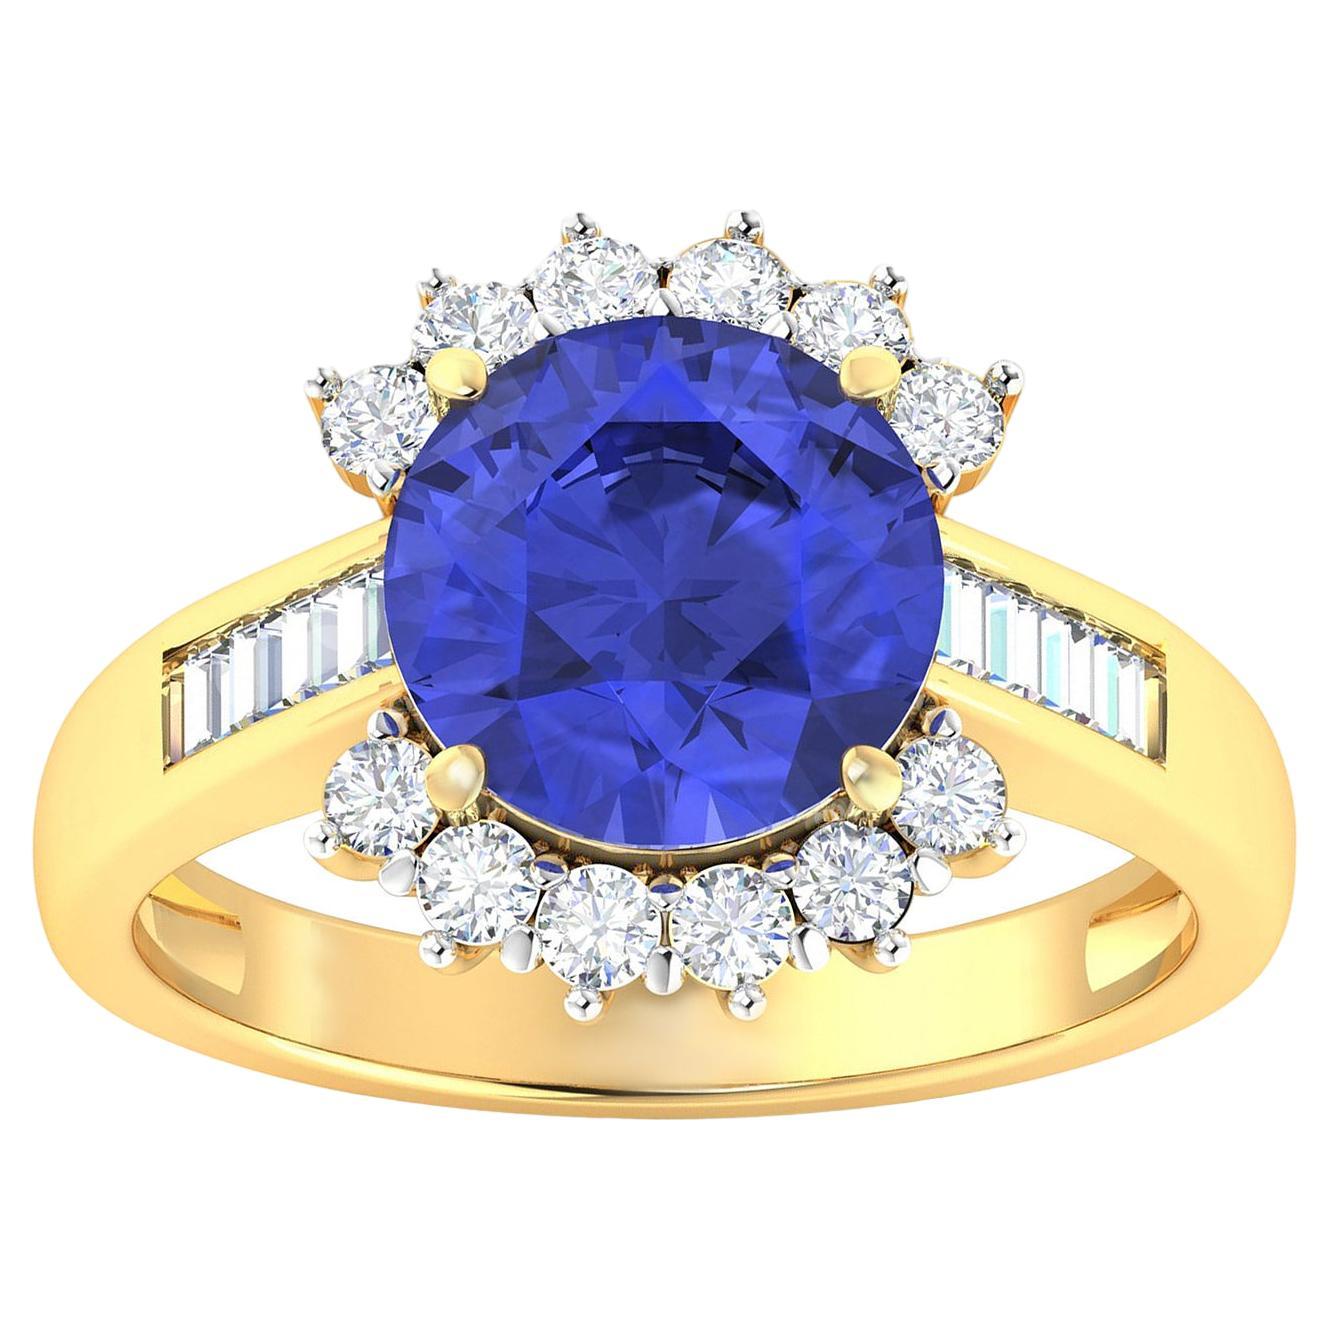 Tanzanite Ring With Diamonds 4.18 Carats 14K Yellow Gold For Sale